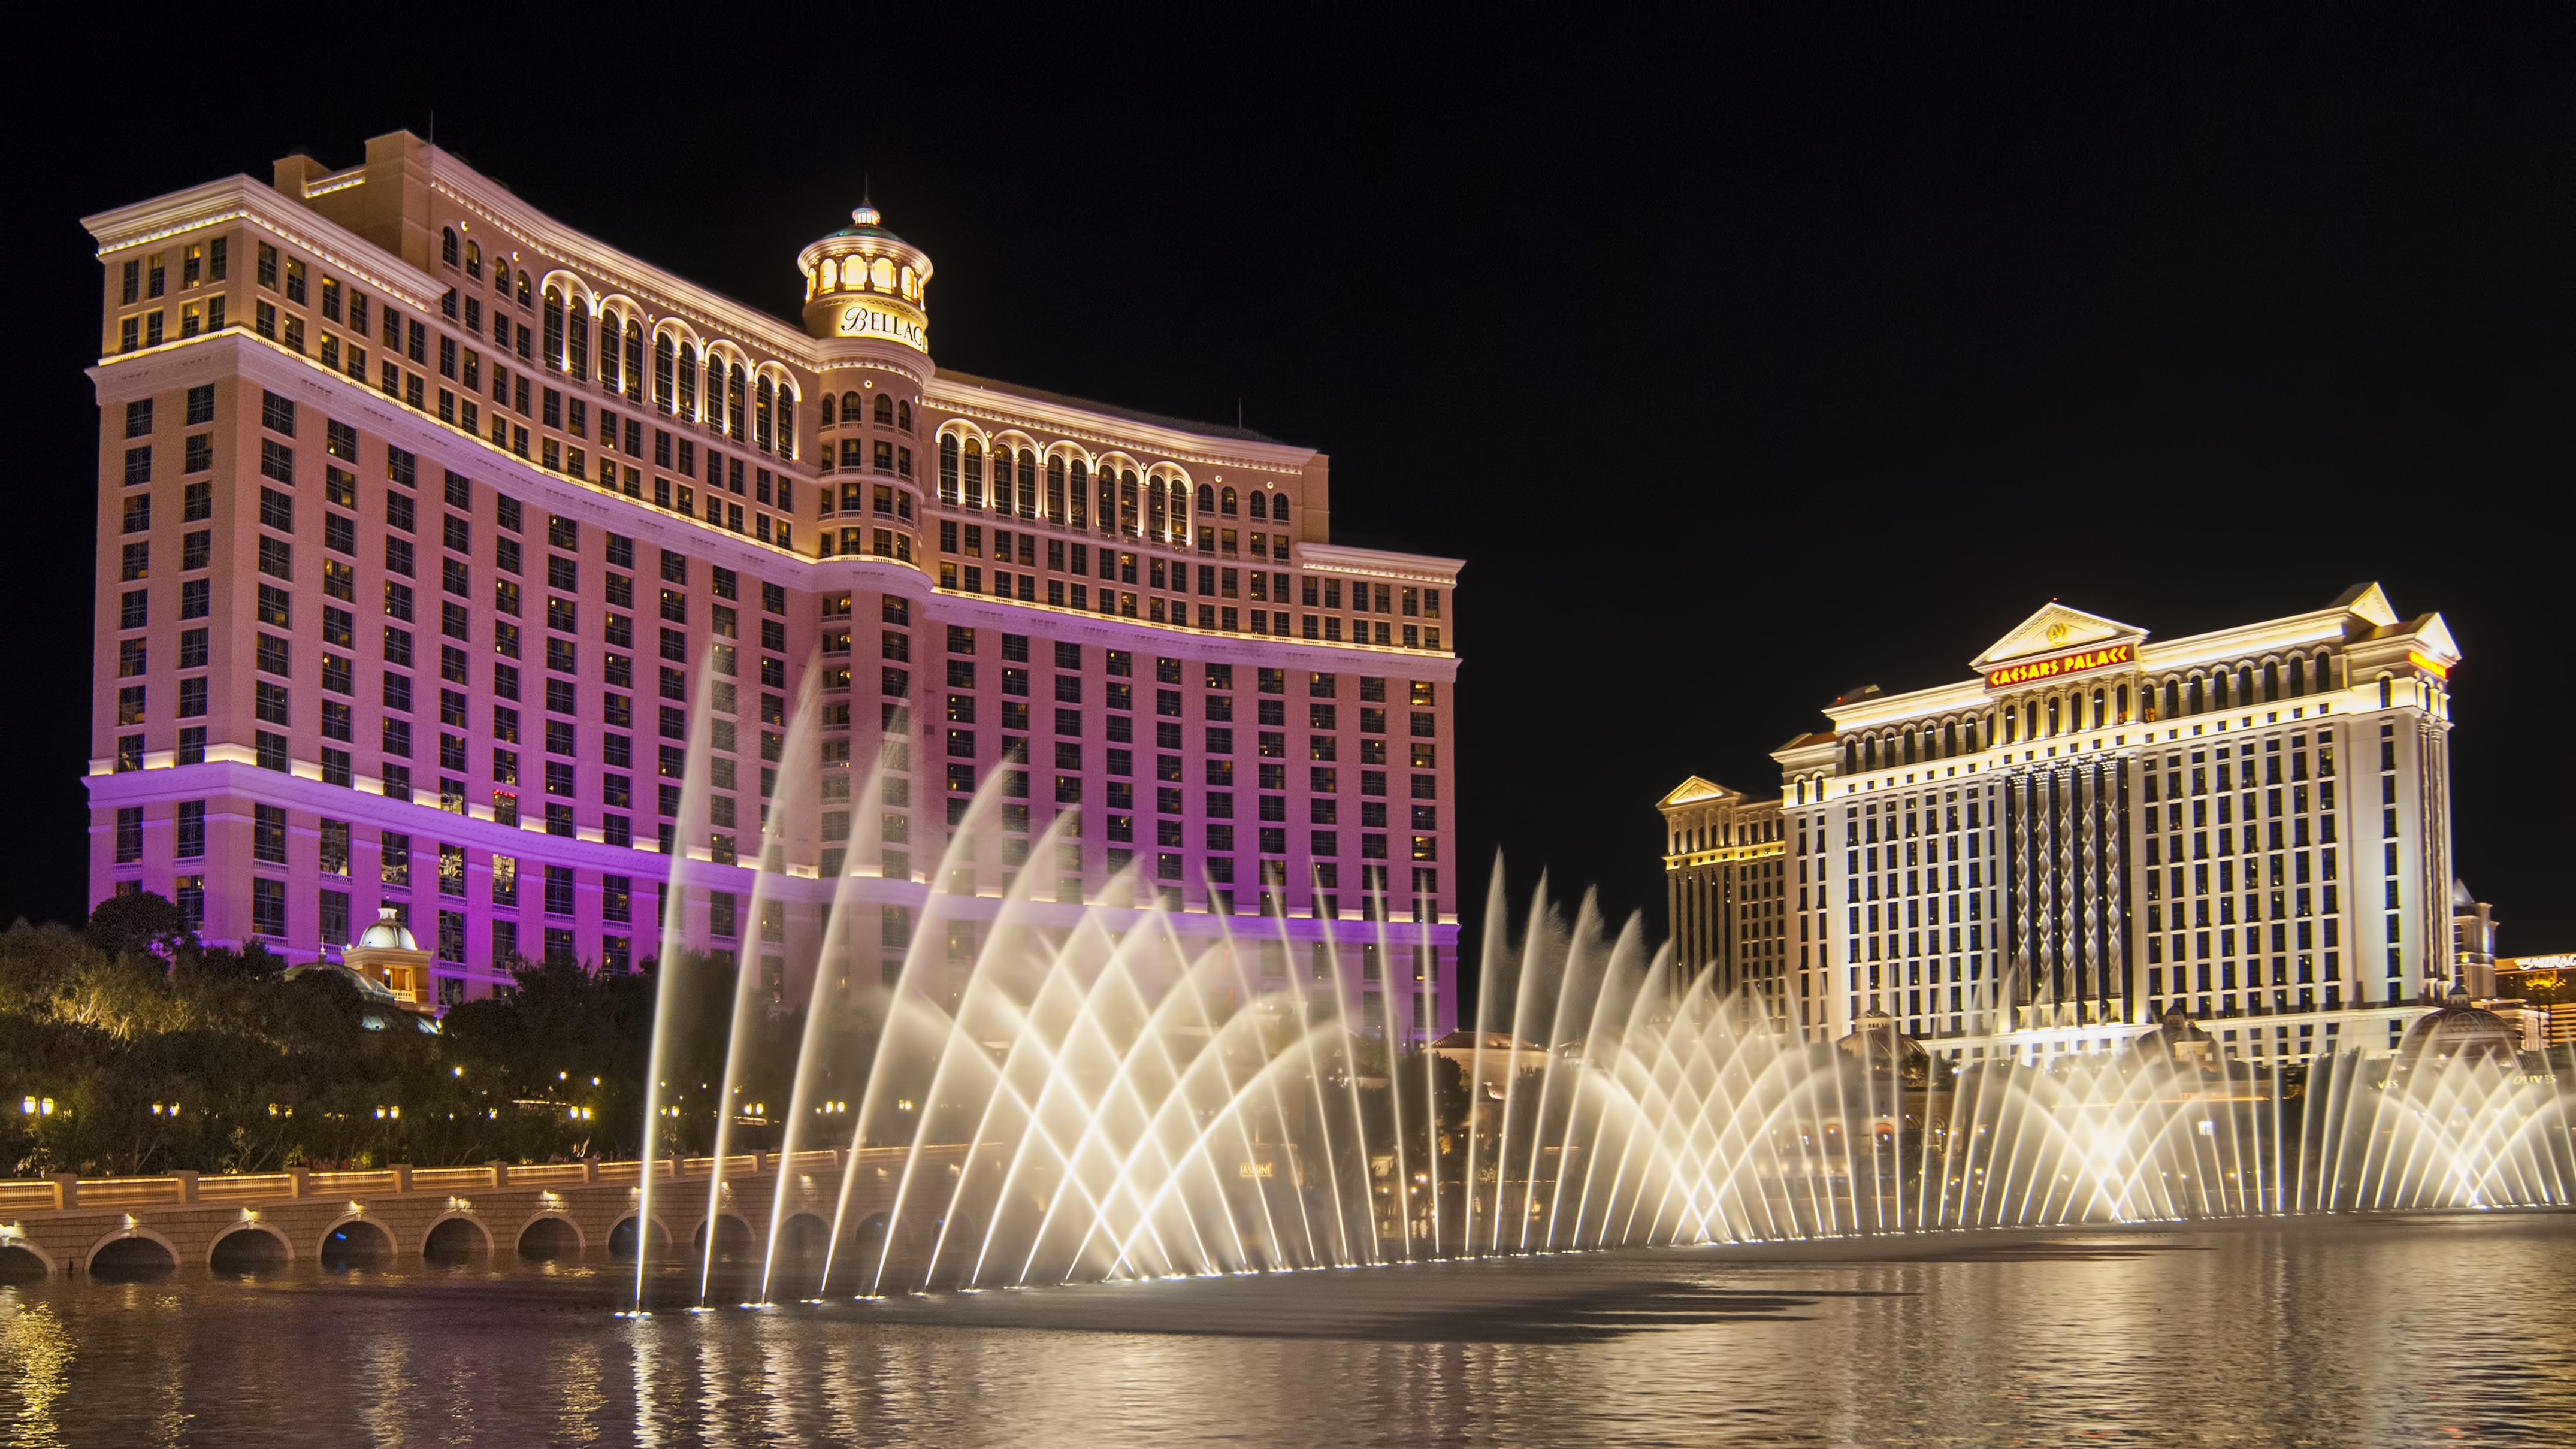 Best Things to Do in Las Vegas - Water Show at the Bellagio